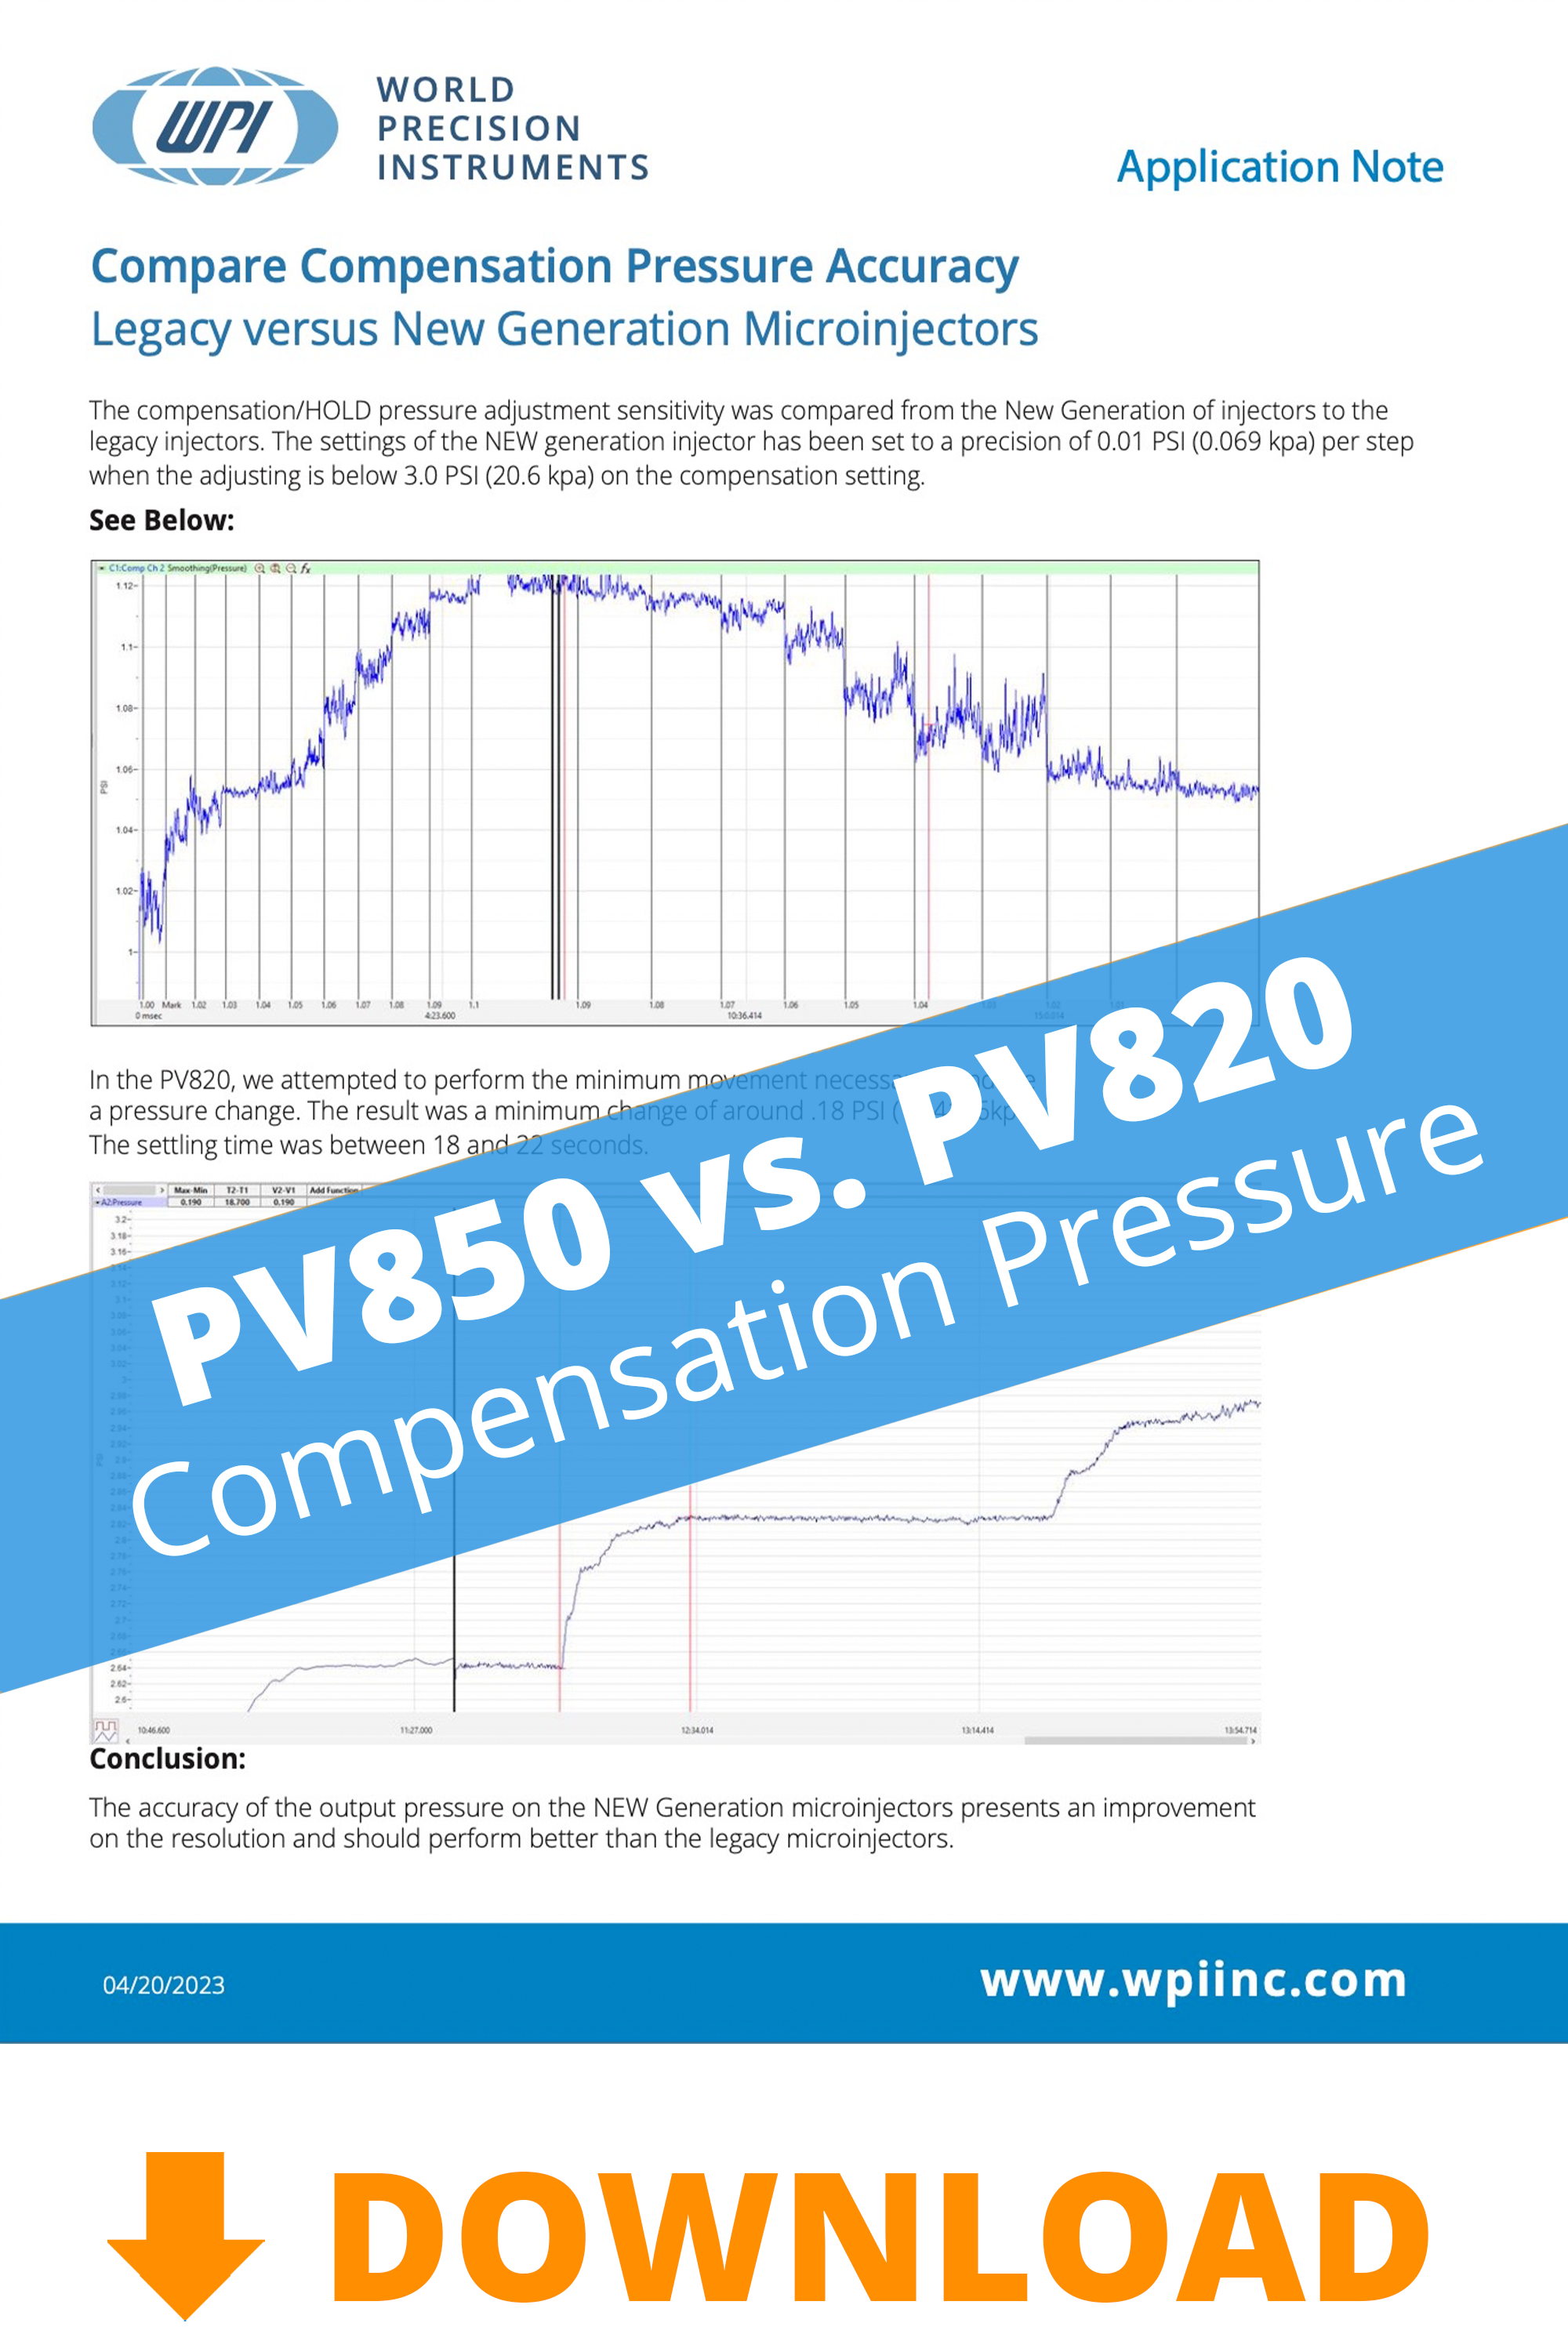 Download the PV850 Microinjector Application Note